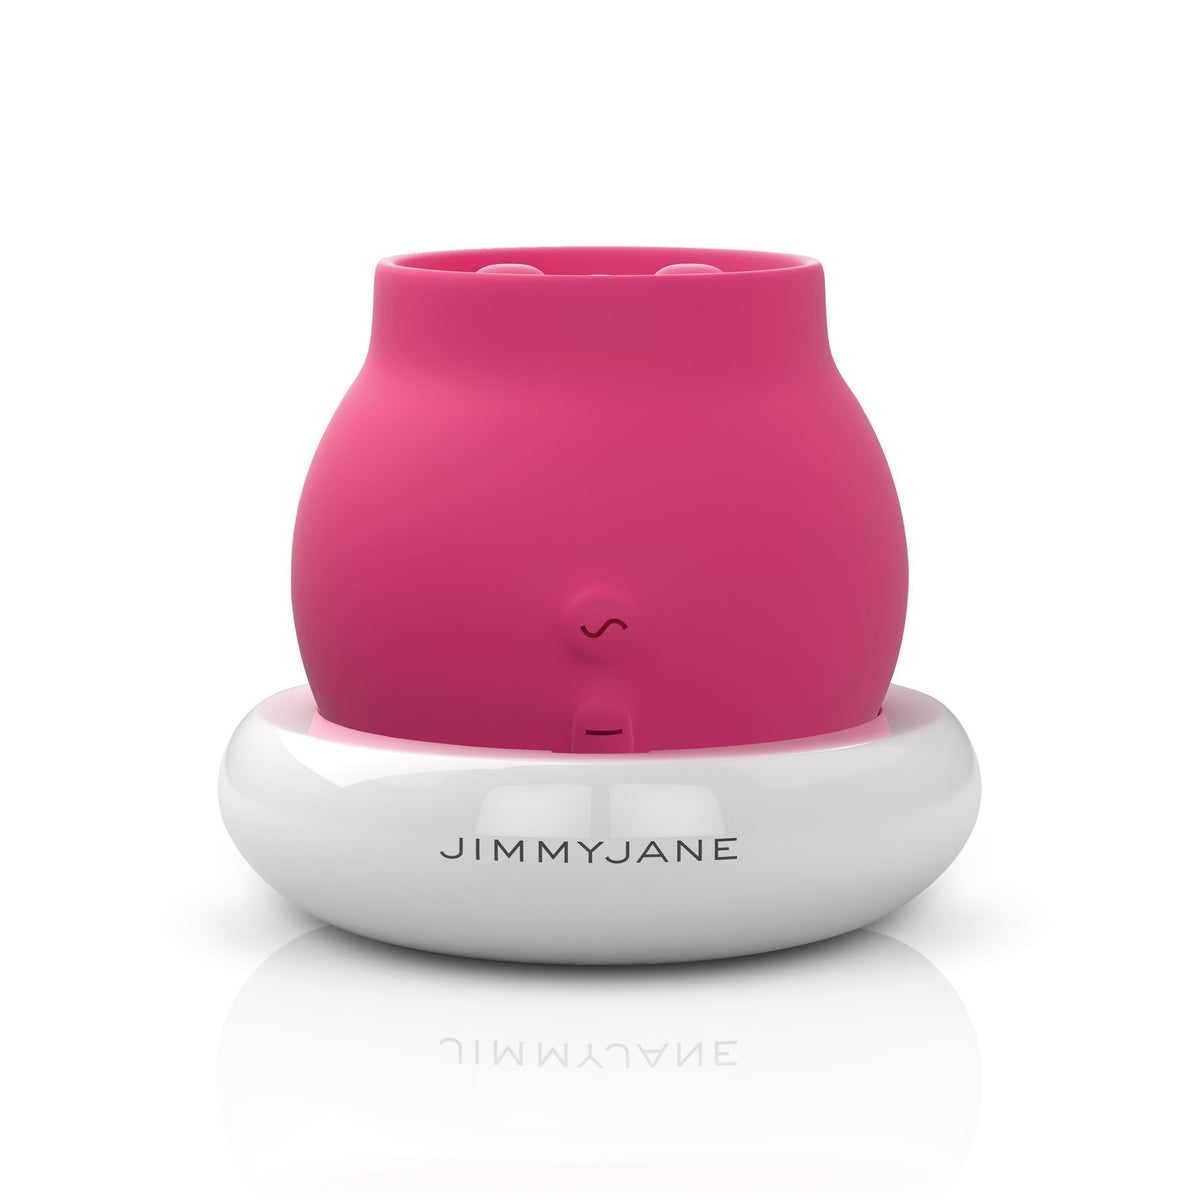 Jimmy Jane - Love Pods Halo Waterproof Vibrator (Pink) Clit Massager (Vibration) Rechargeable Durio Asia